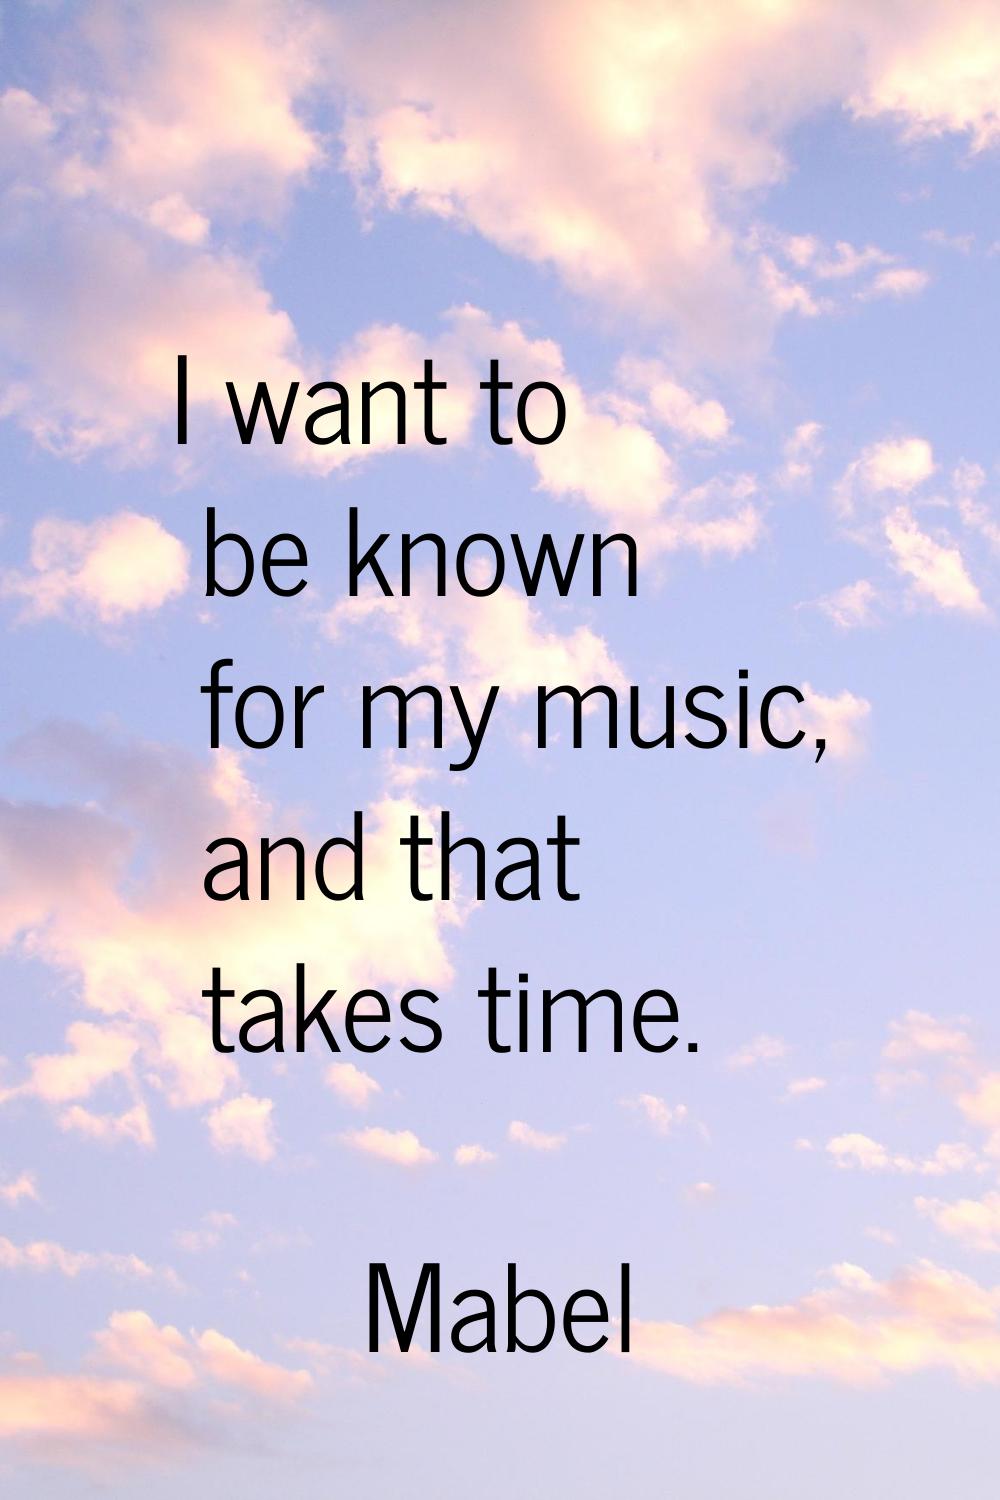 I want to be known for my music, and that takes time.